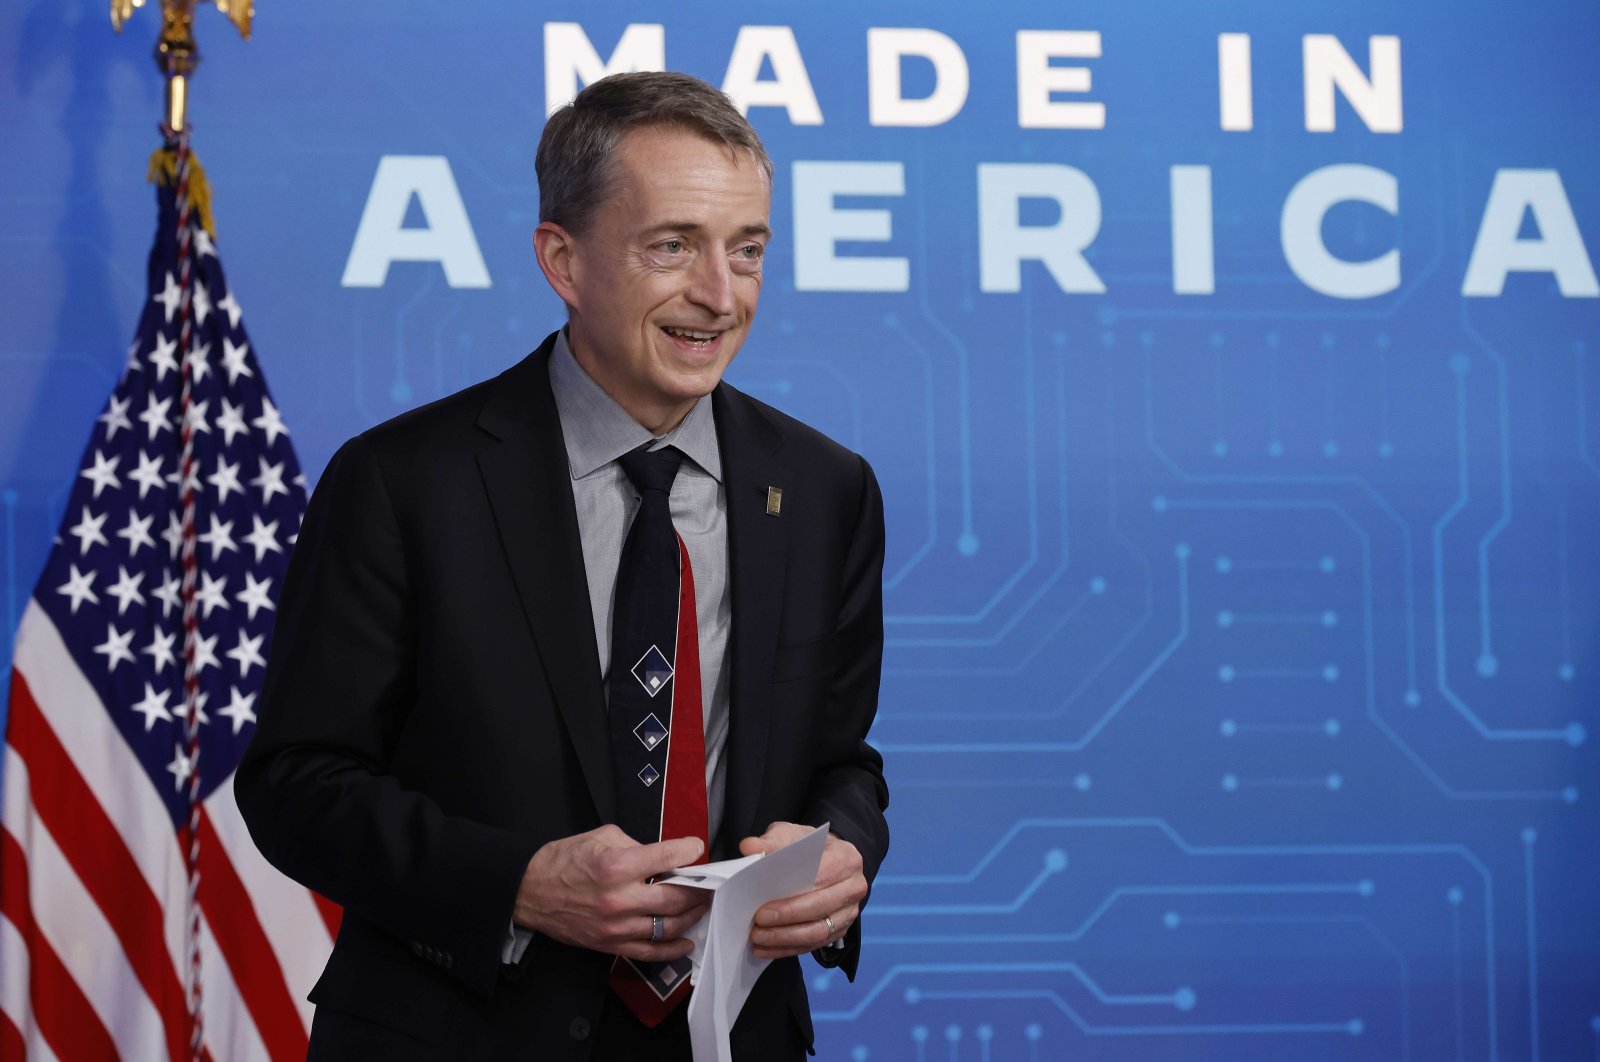 Intel CEO Patrick Gelsinger announces the factory plans, in Ohio in the South Court Auditorium of the Eisenhower Executive Office Building, Washington D.C., Jan. 21, 2022. (AFP Photo)